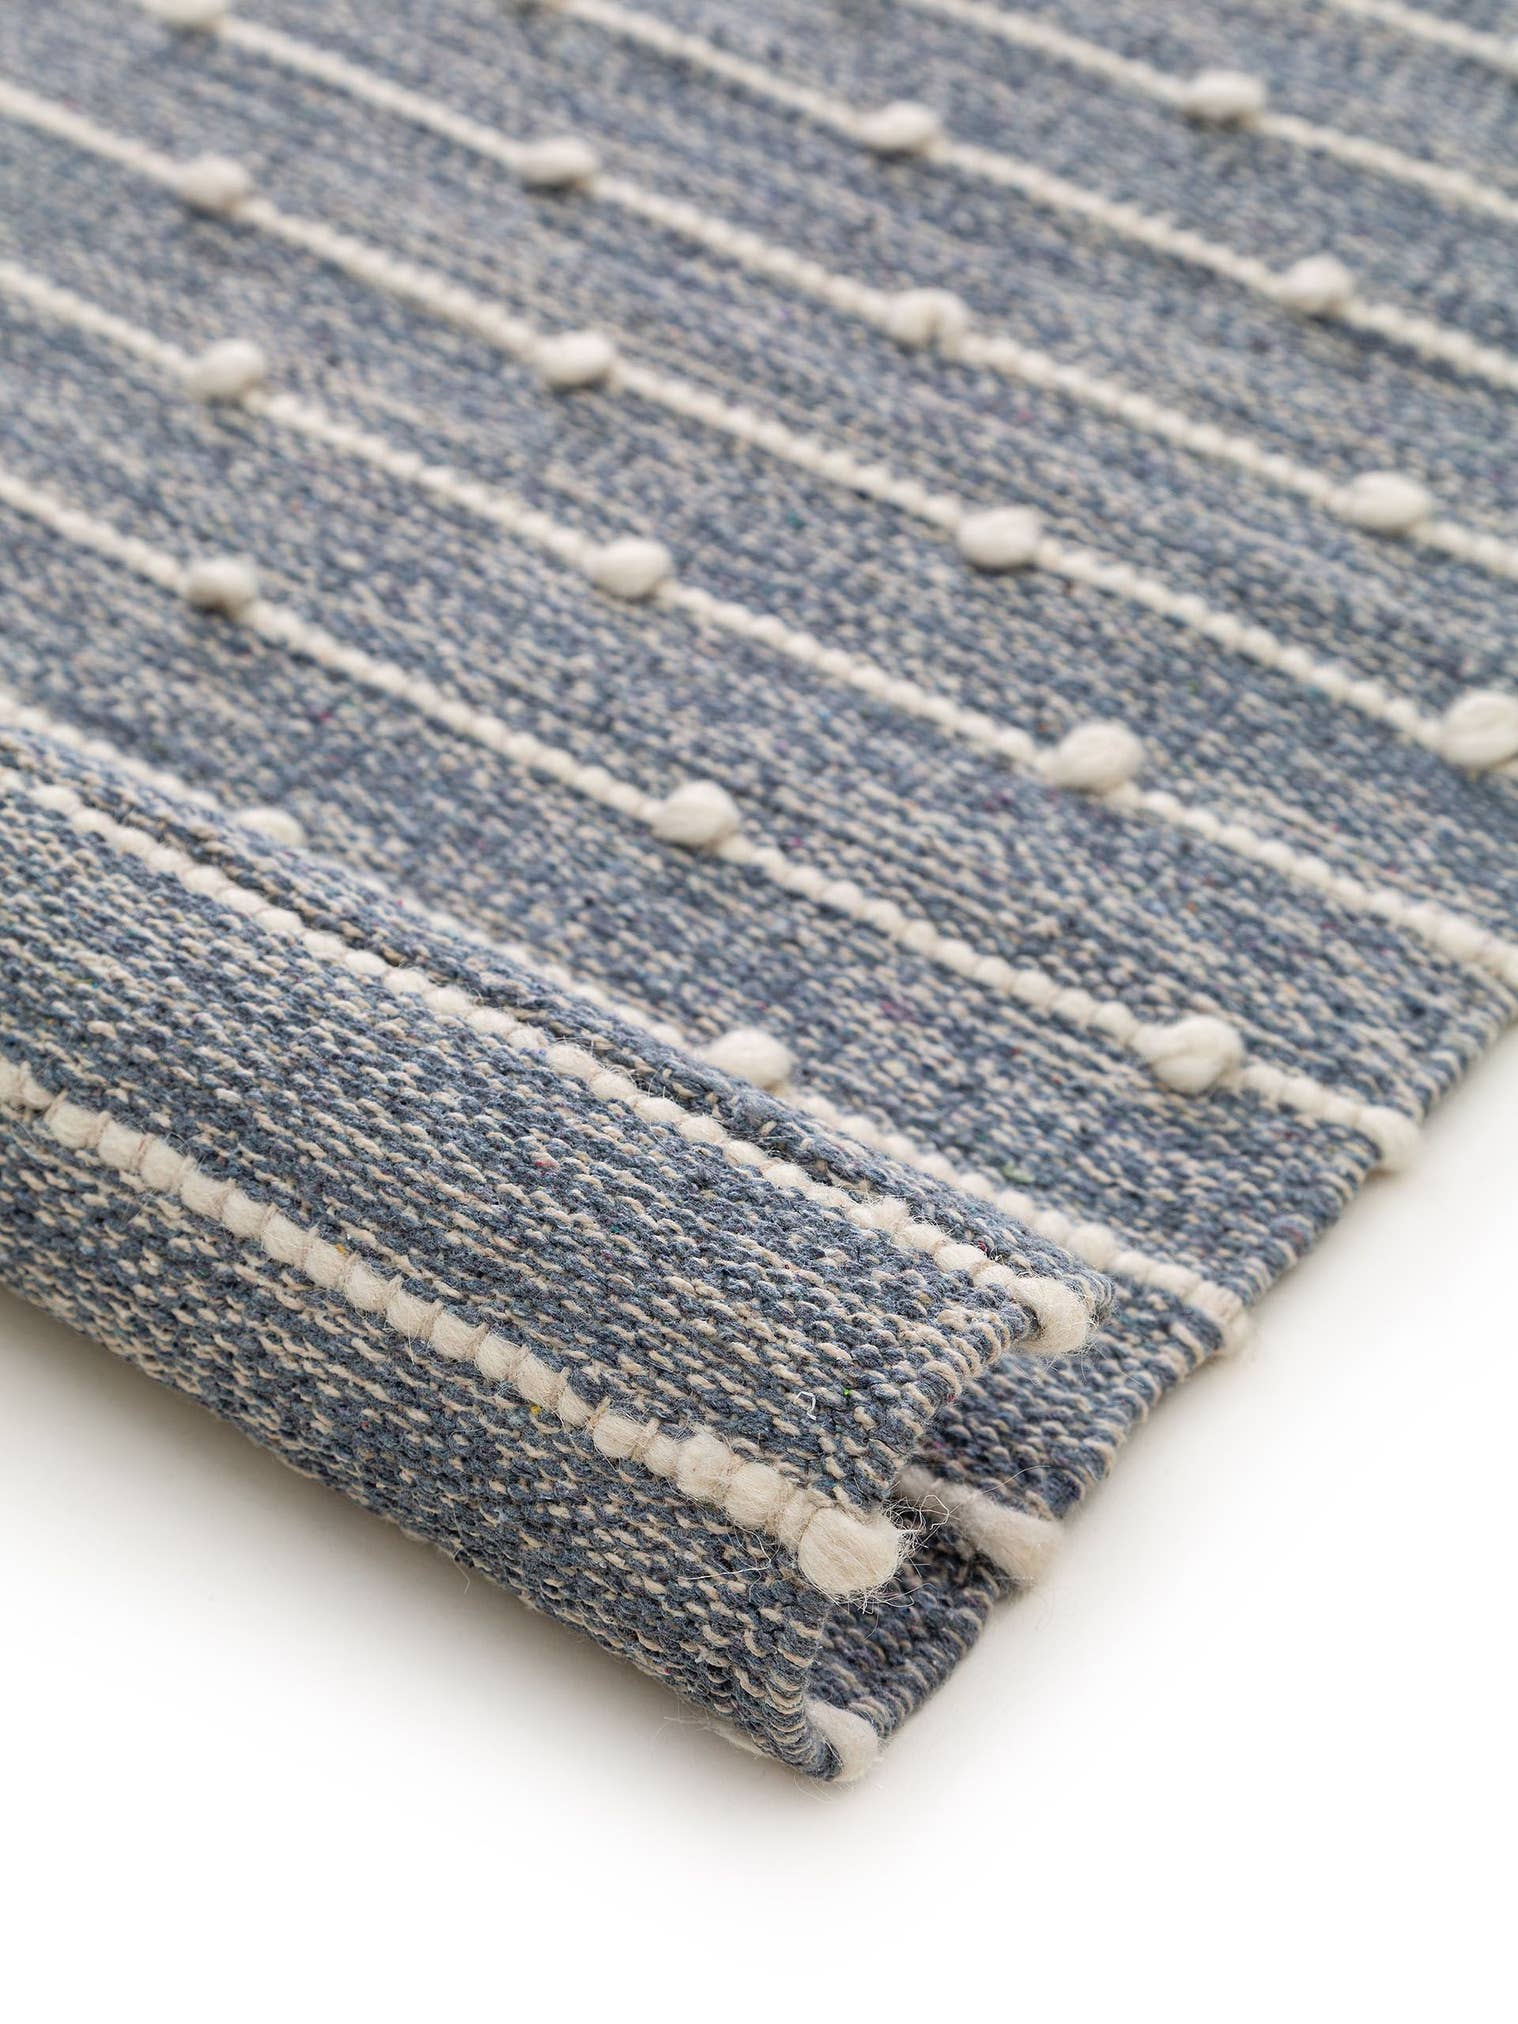 Rug made of 80% cotton, 20% wool in Blue with a 1- 5 mm high pile by Lytte